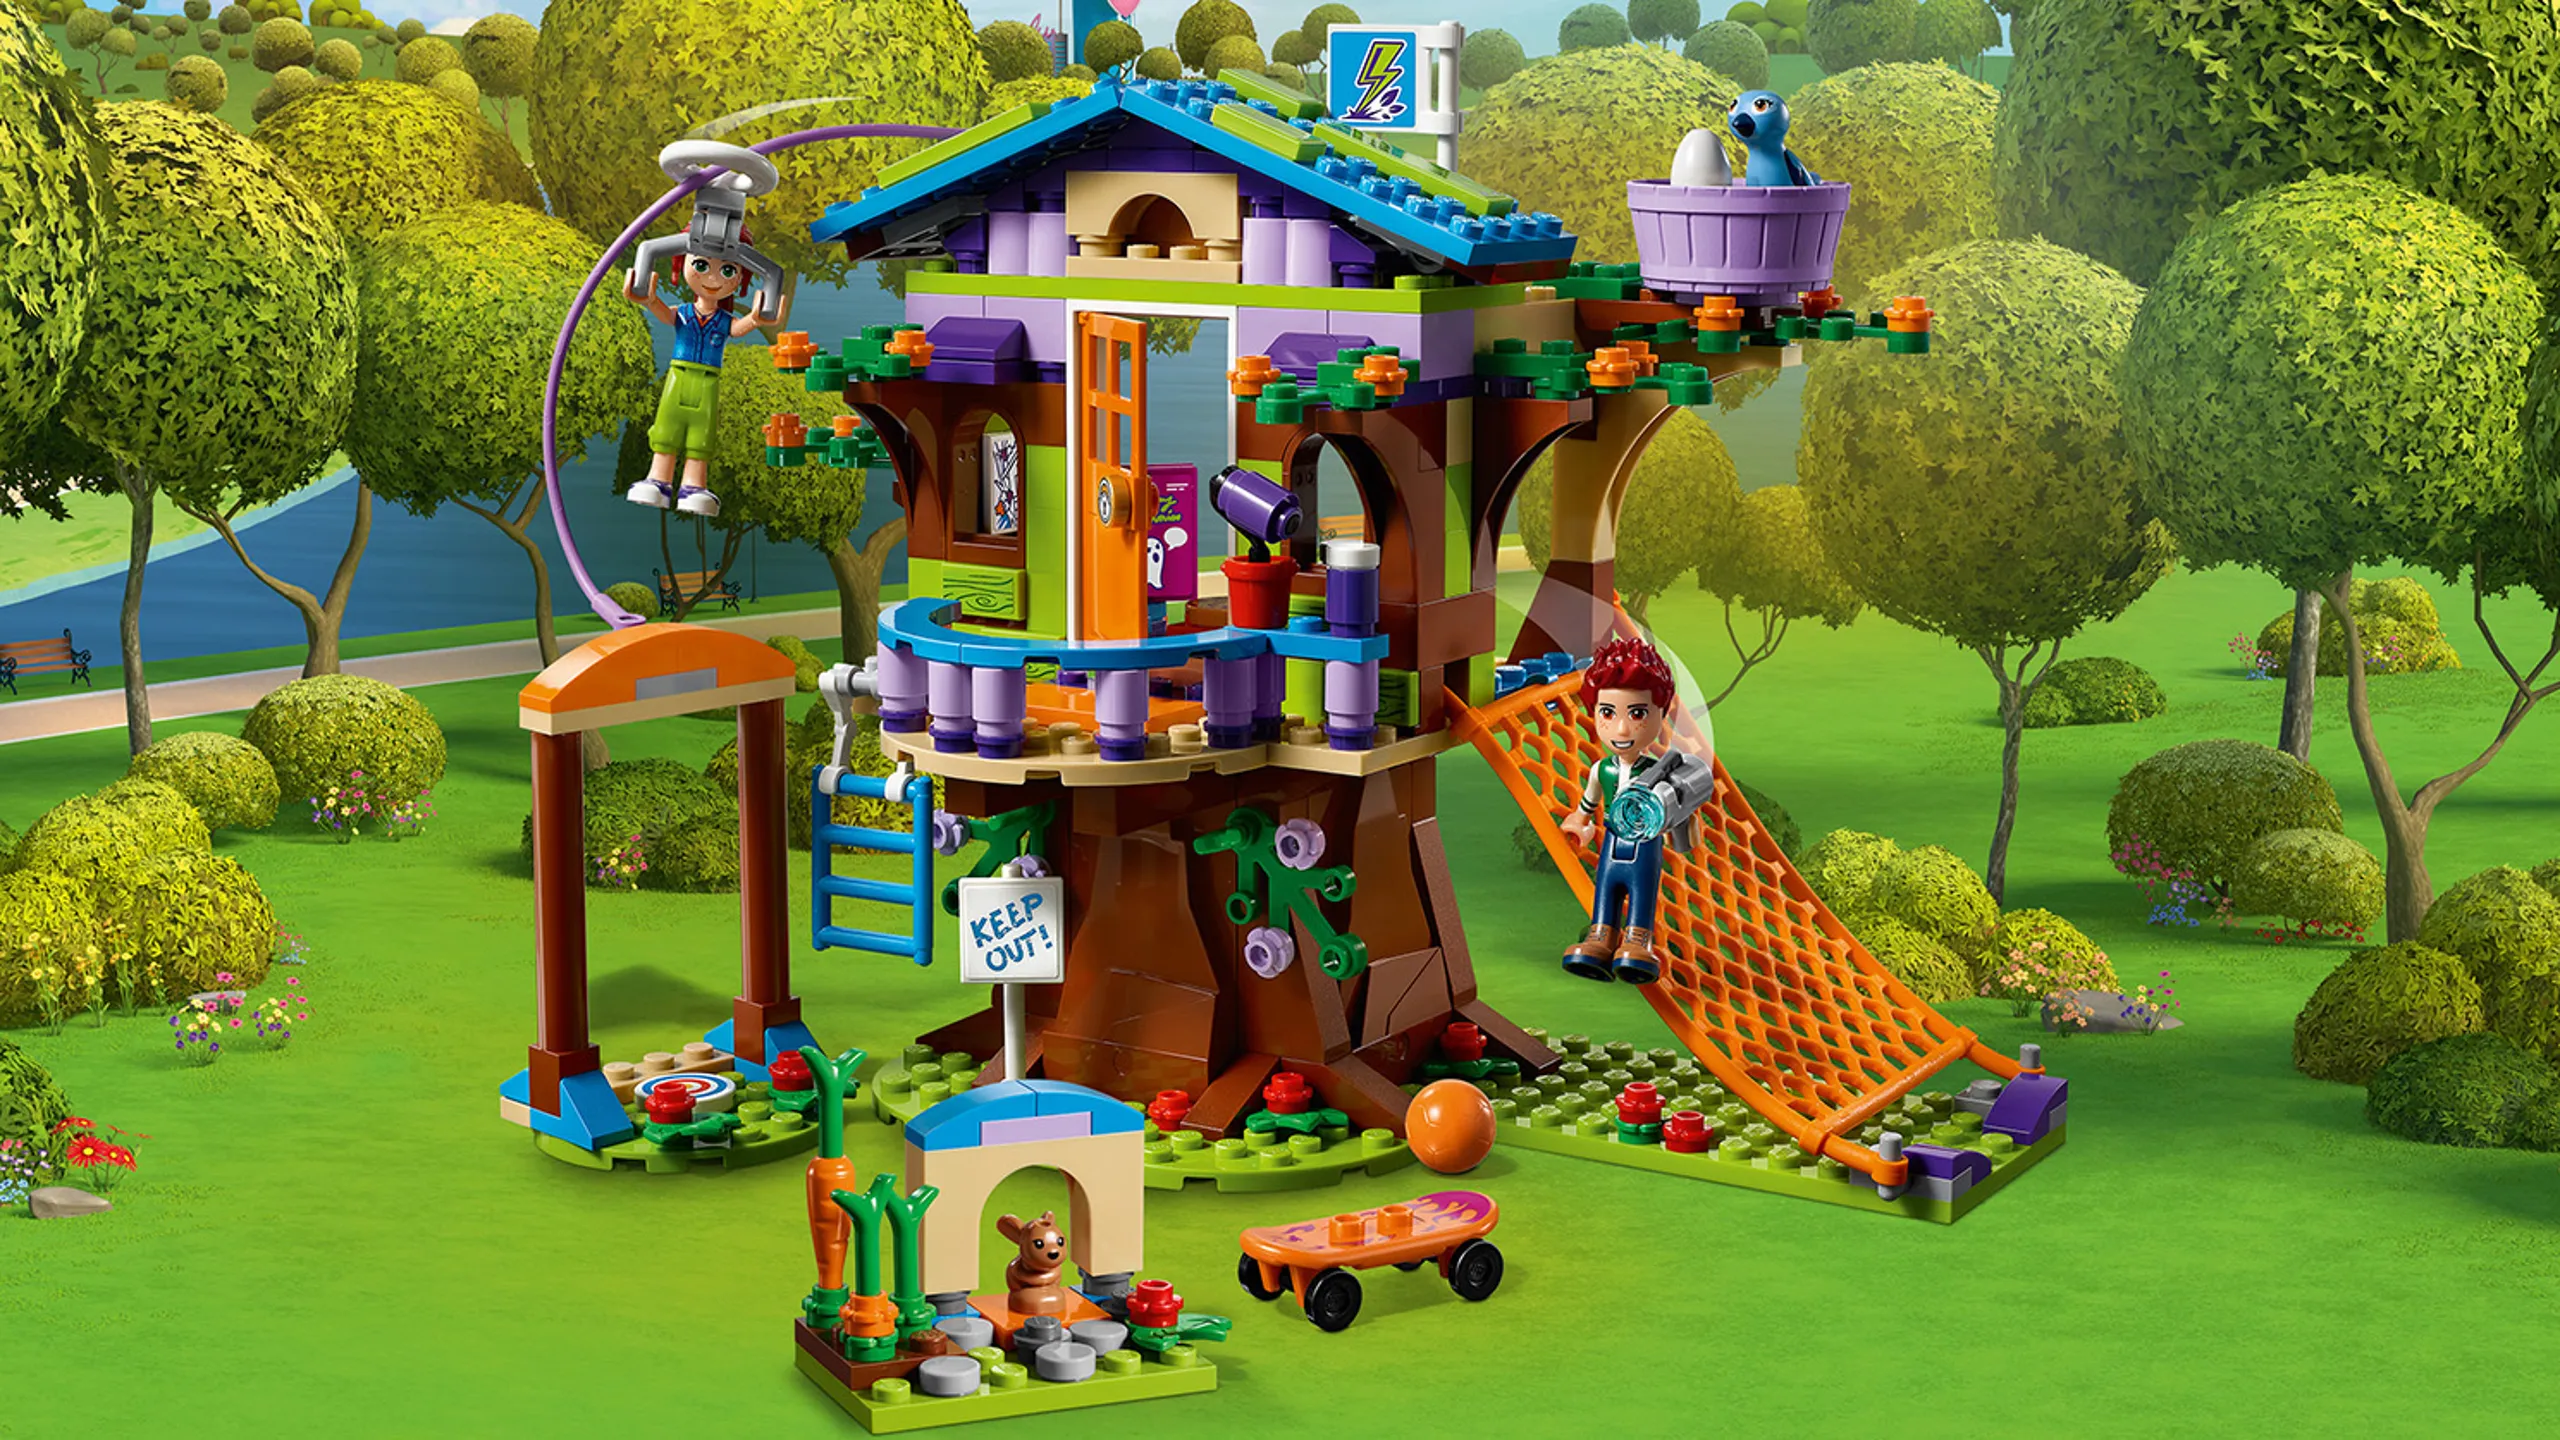 LEGO Friends Mia's Tree House - 41335 - Decorate Mia's tree house by putting up pictures of her friends and family and make it into the perfect park hangout spot. Crawl up the net and use the water gun to keep out any unwanted visitors! Then slide down the zip wire to visit Mia's bunny Mimì in her little house and give her a carrot. 